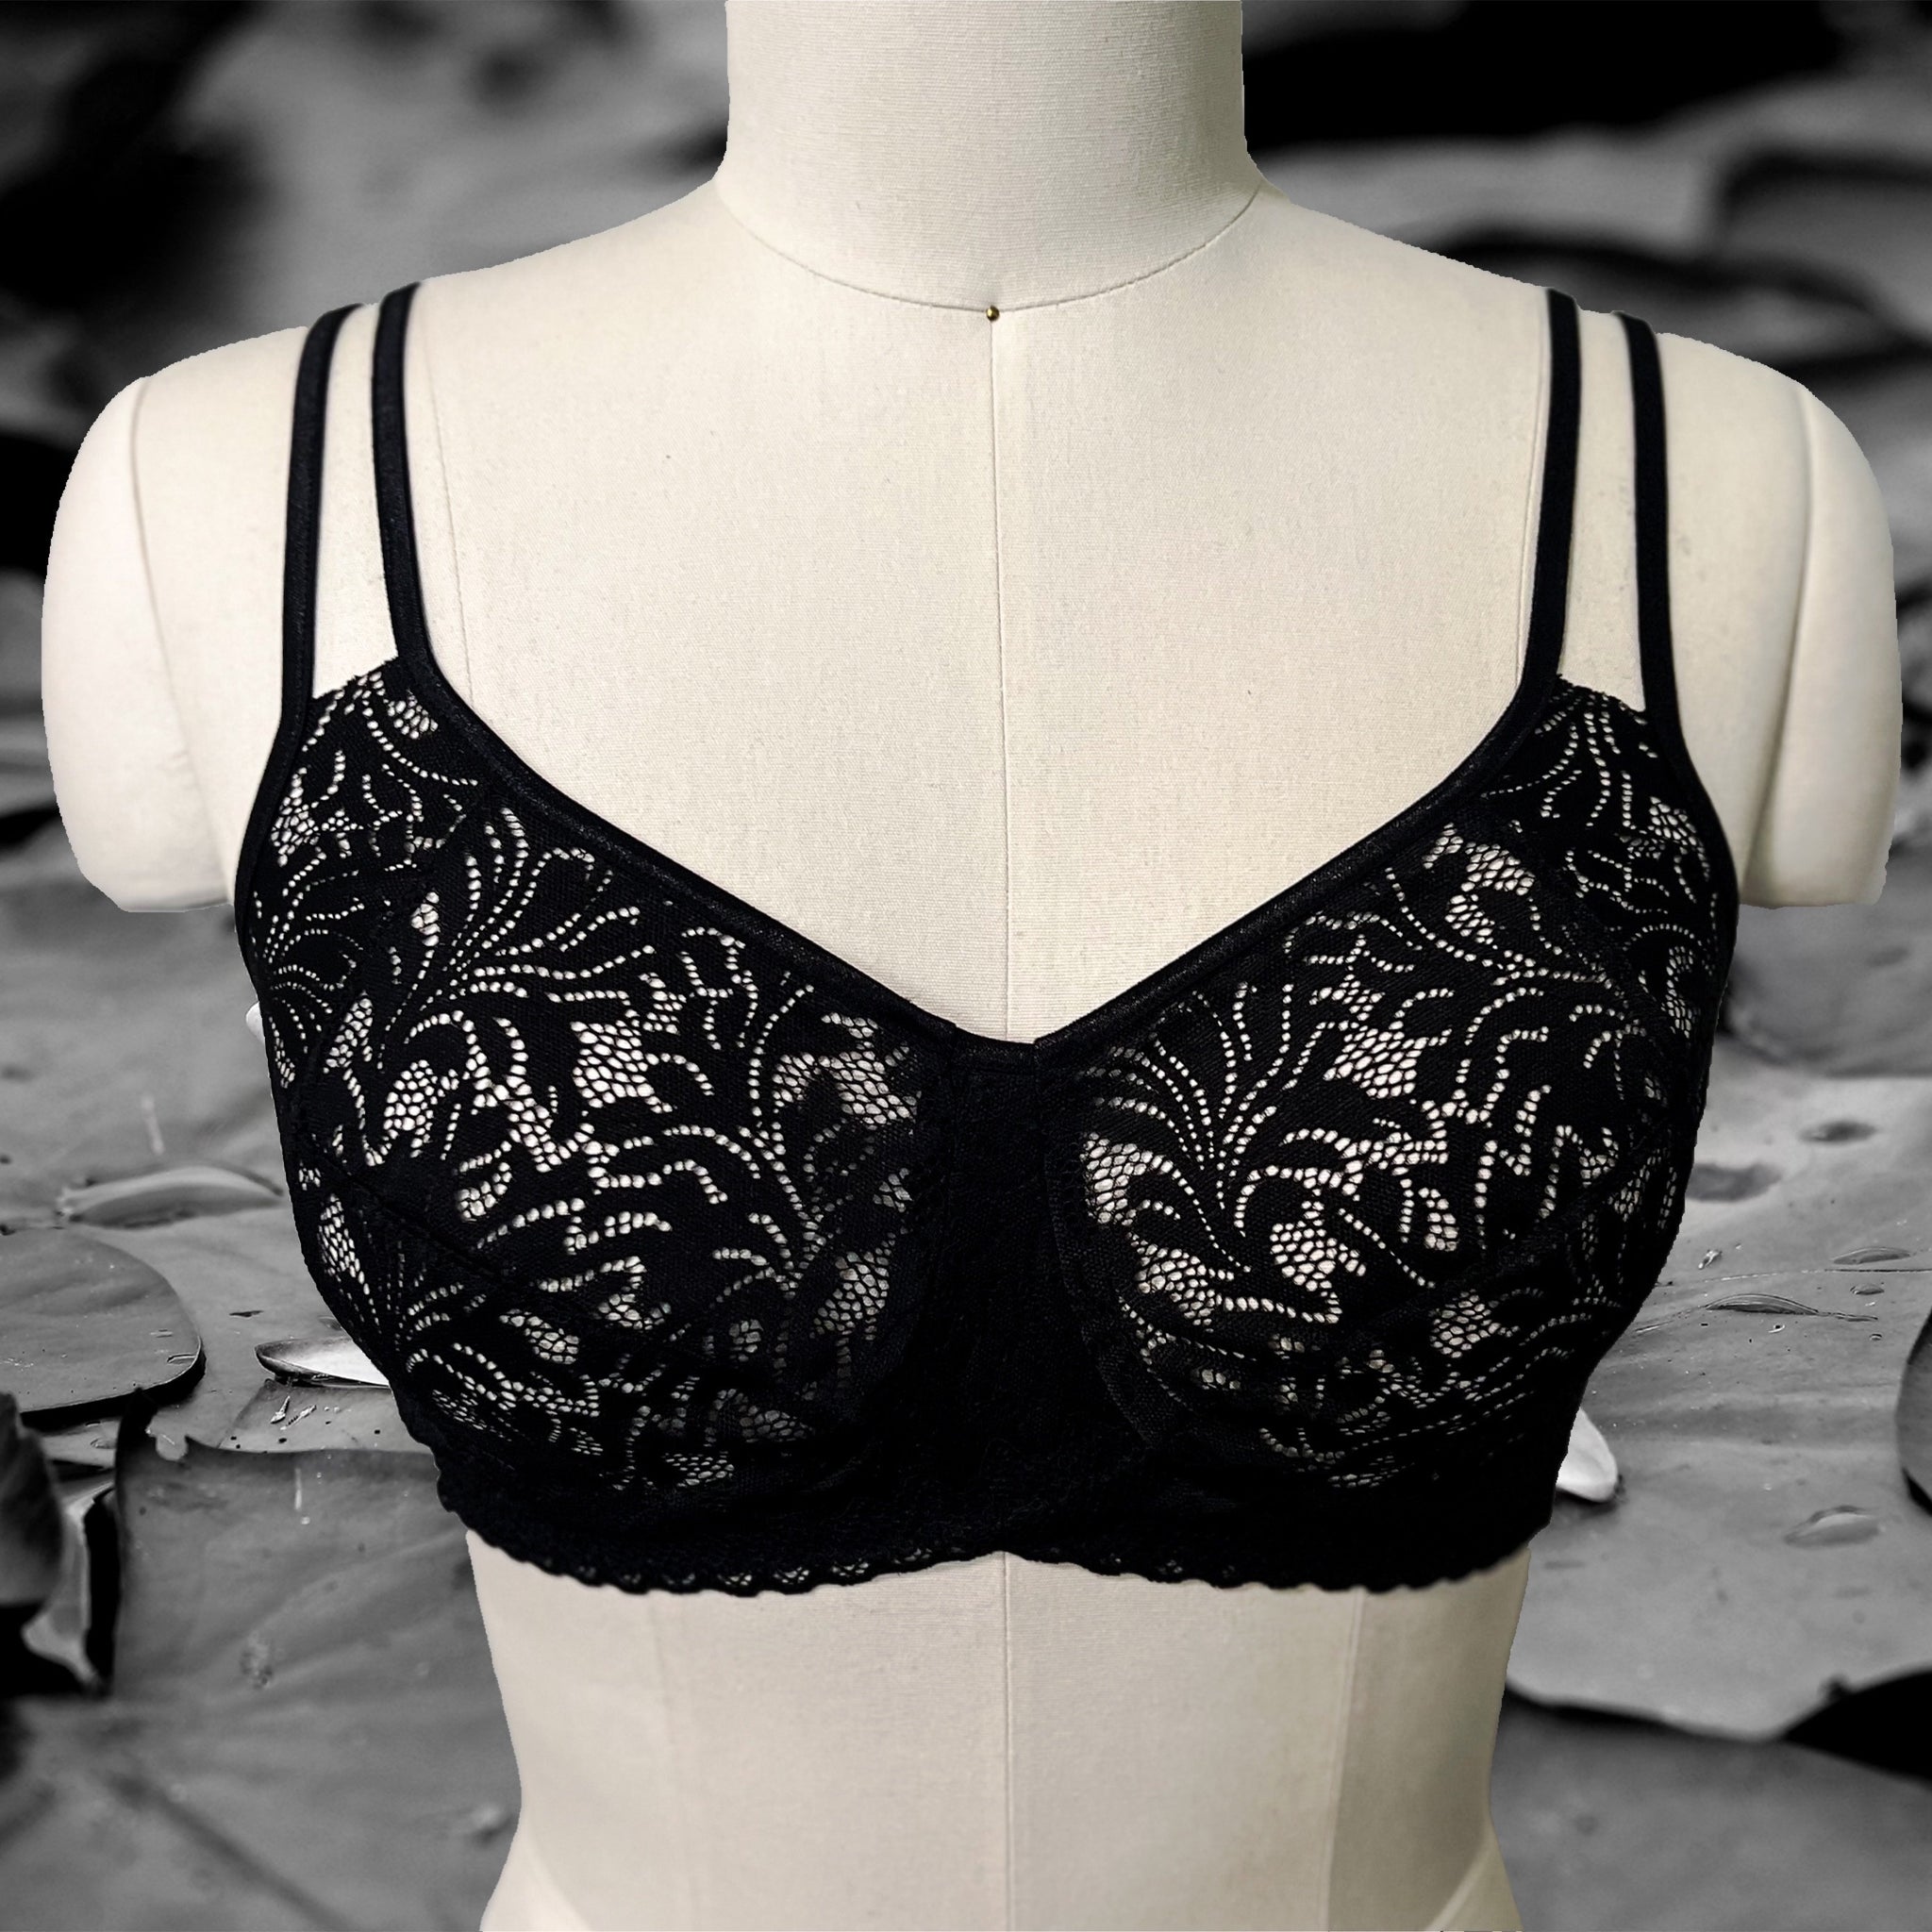 Sew Comfy Bra Sew-Along – Part 1: Pattern and Sizing